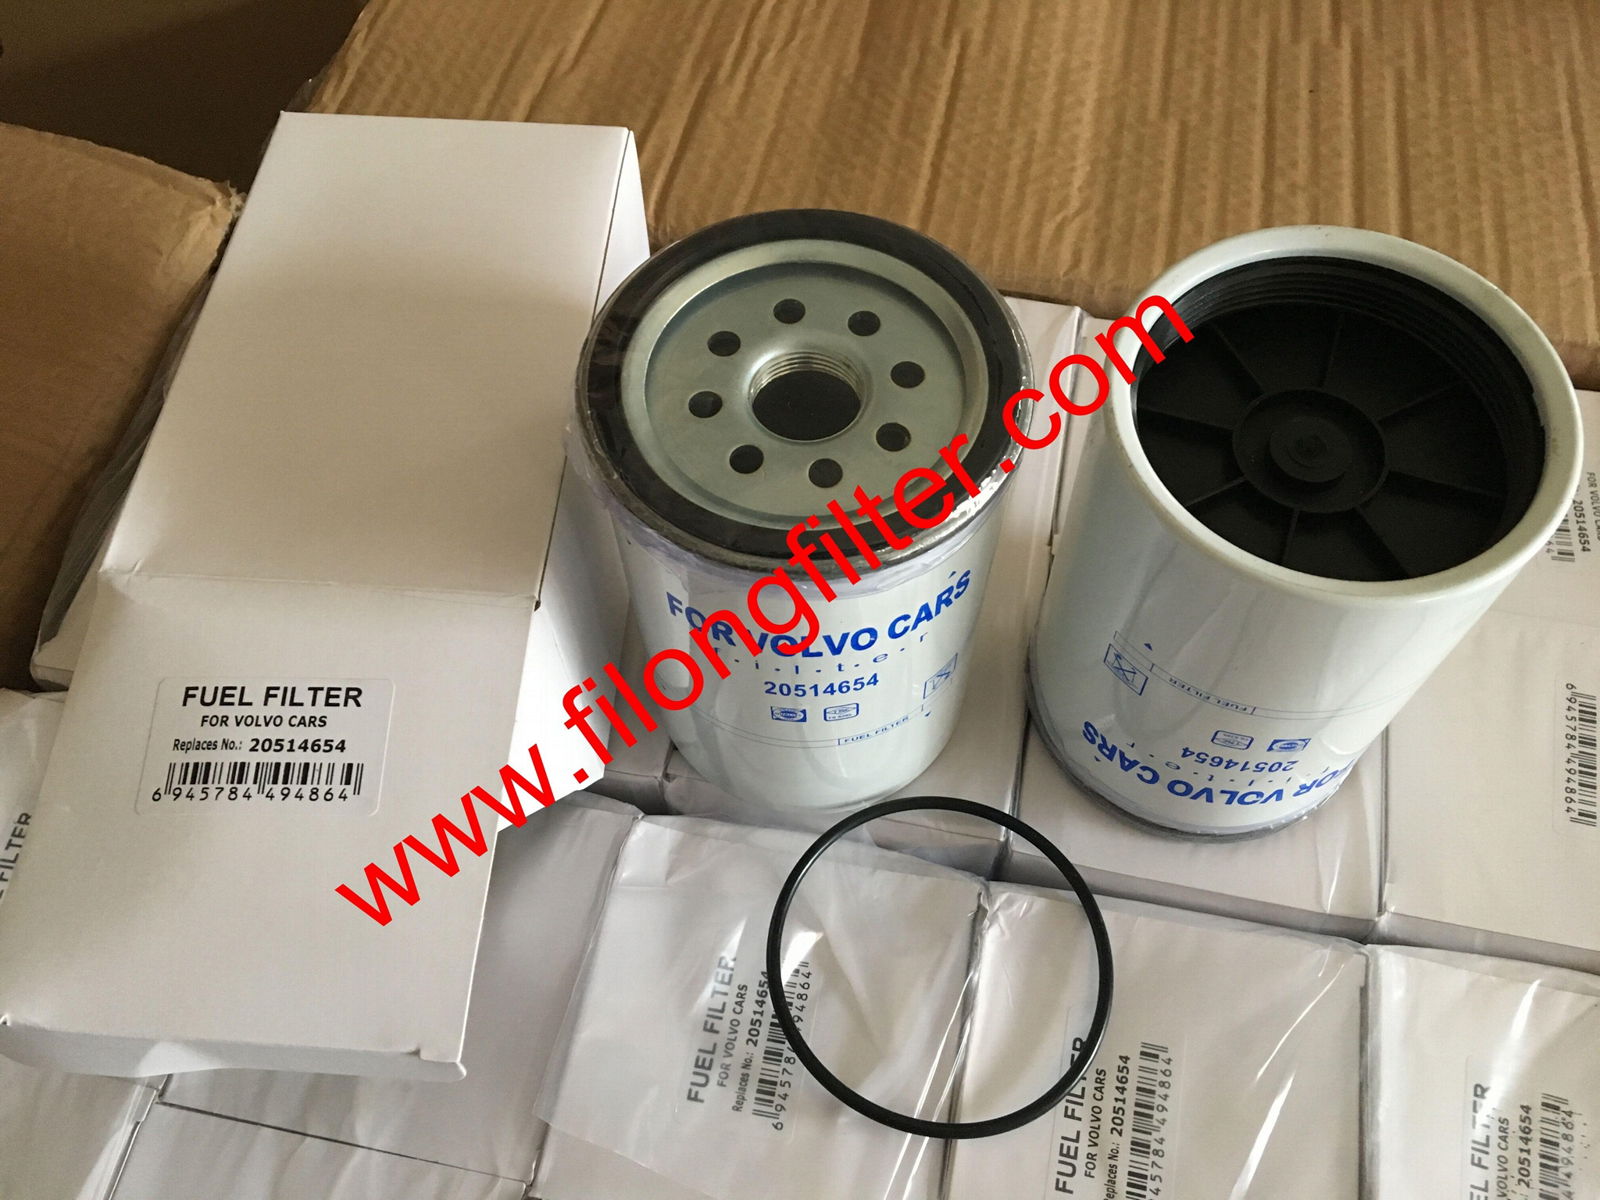 FILONG Manufactory For VOLVO Fuel filter  20514654 WK940/33x KC362D 20480593,20514654,20998367,20541383,20386080,20998346 WK940/32x  H700WK,H7025WK30